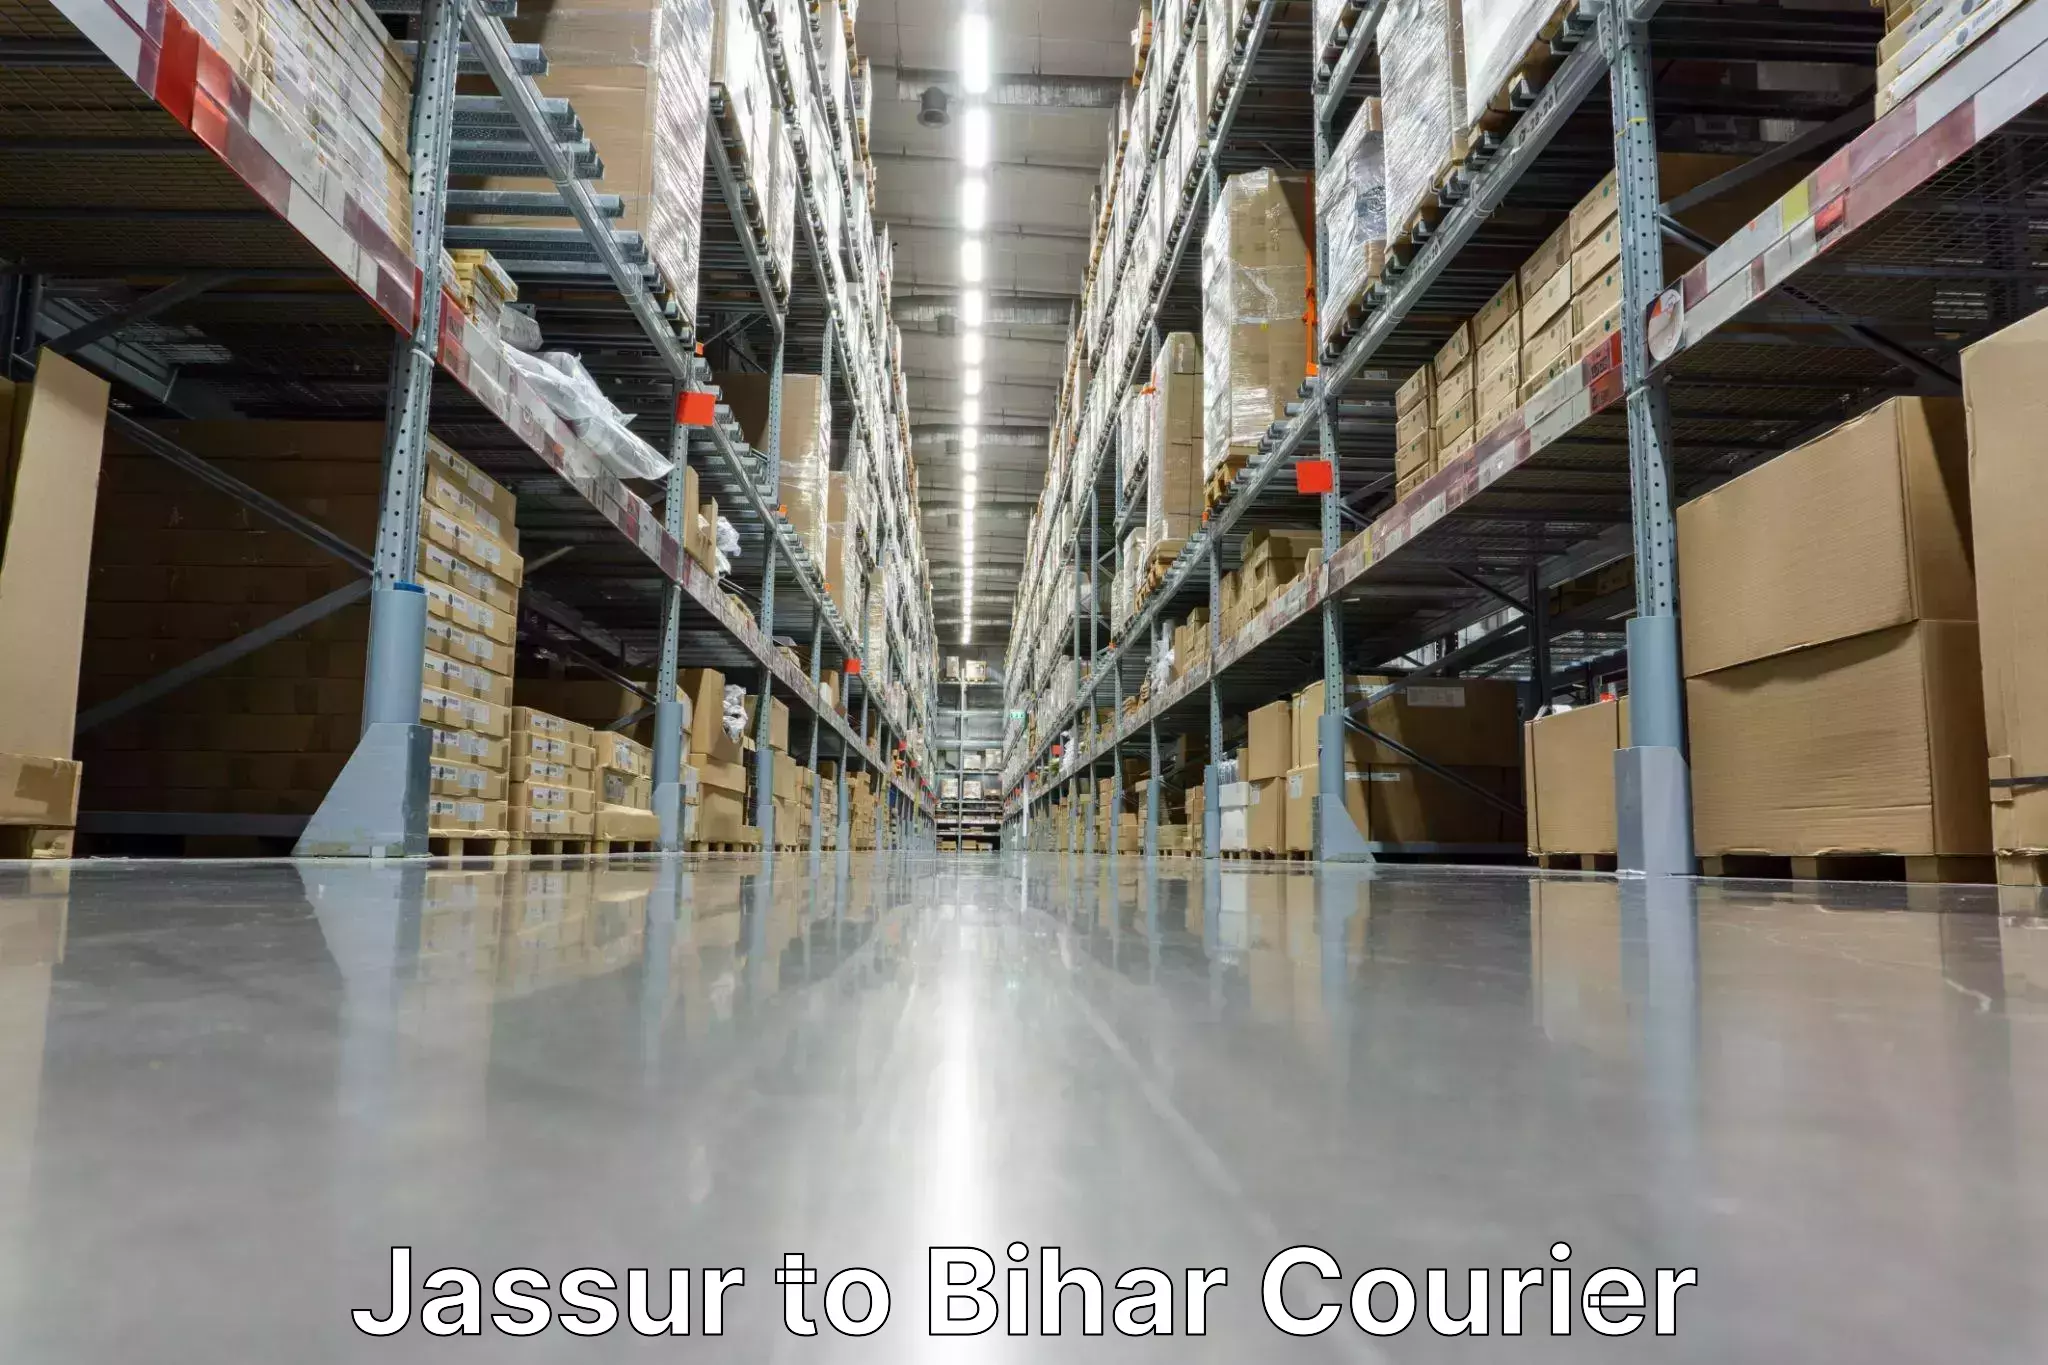 Reliable parcel services in Jassur to Dhaka